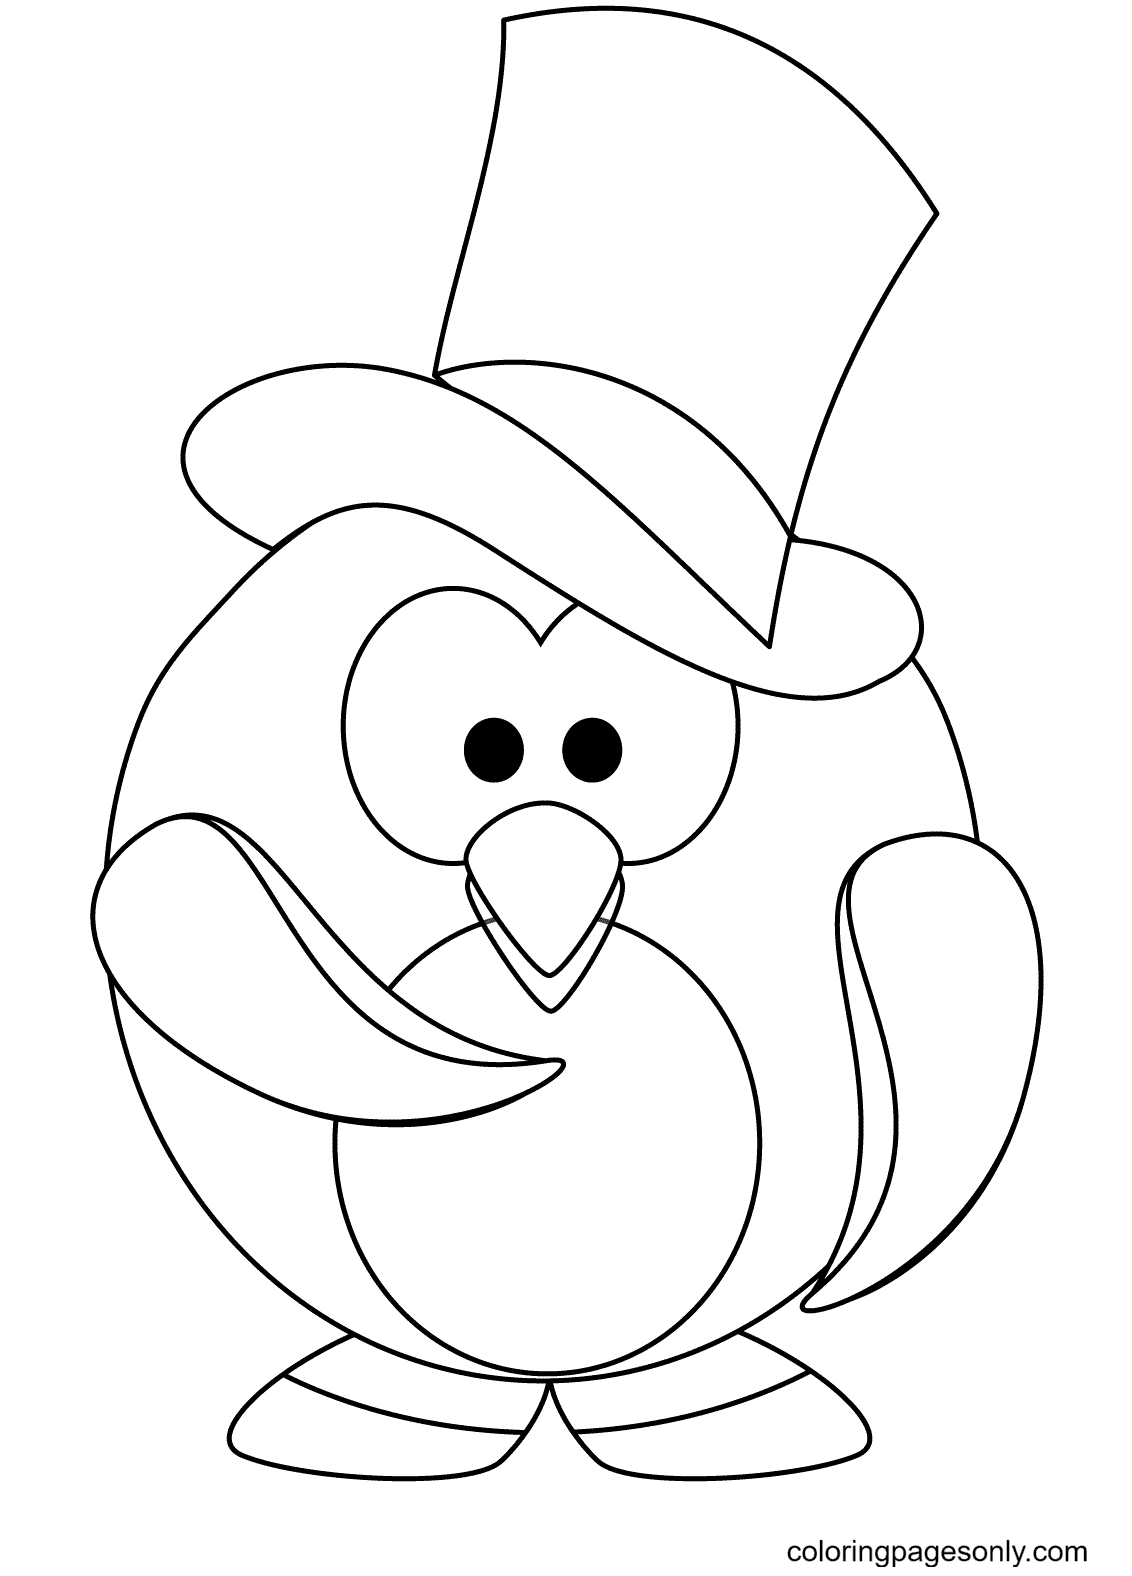 The Gentleman Penguin Coloring Page